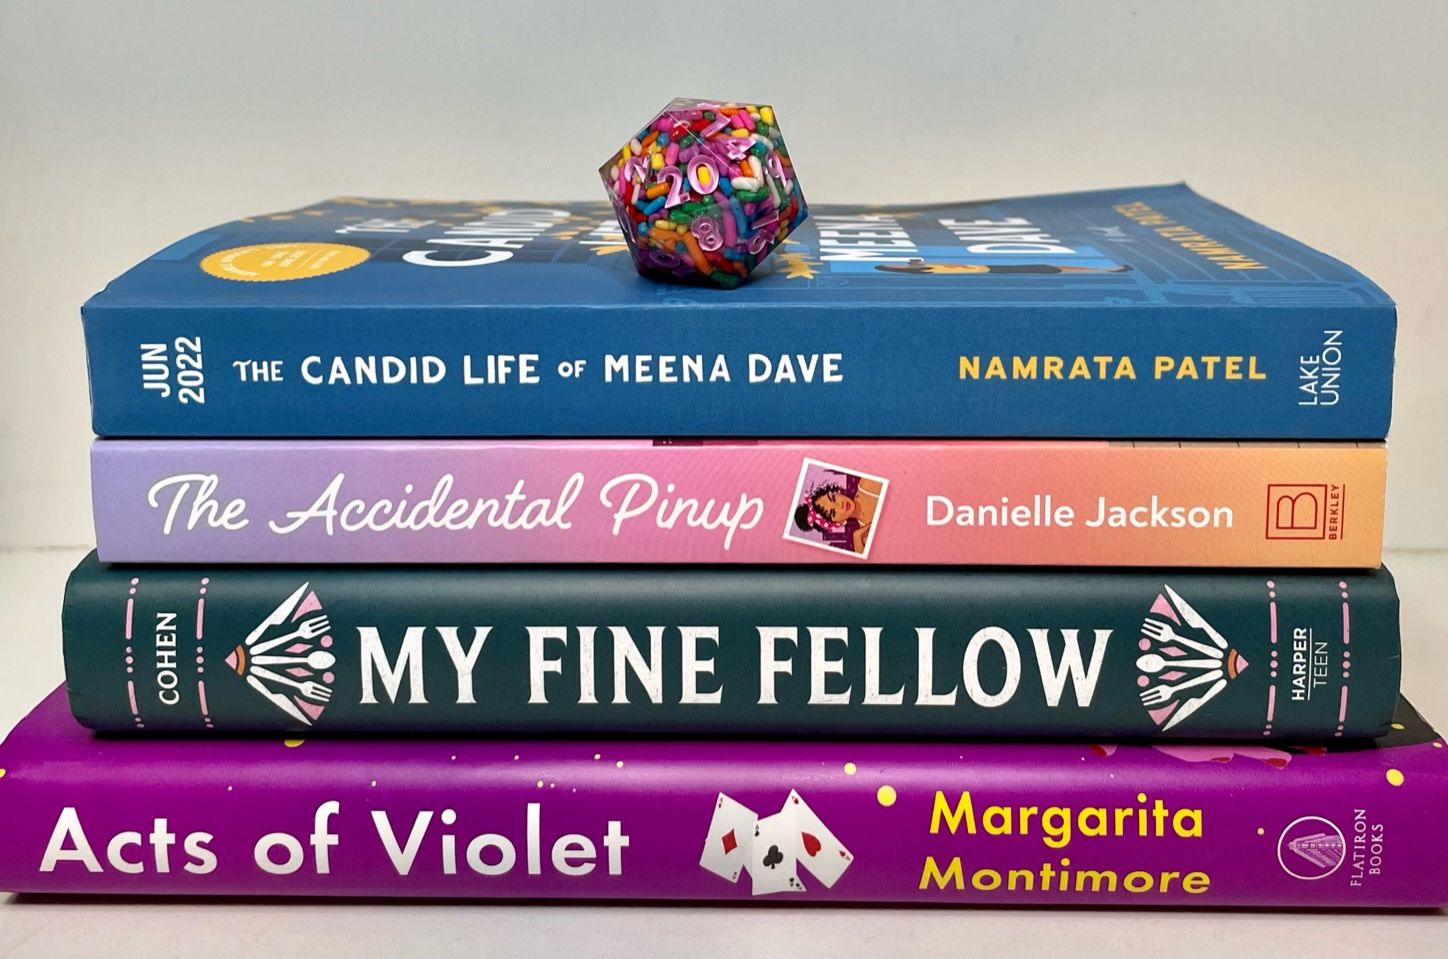 A 20-sided die full of sprinkles with pink numbers sits atop a stack of books (The Candid Life of Meena Dave, The Accidental Pinup, My Fine Fellow, and Acts of Violet)